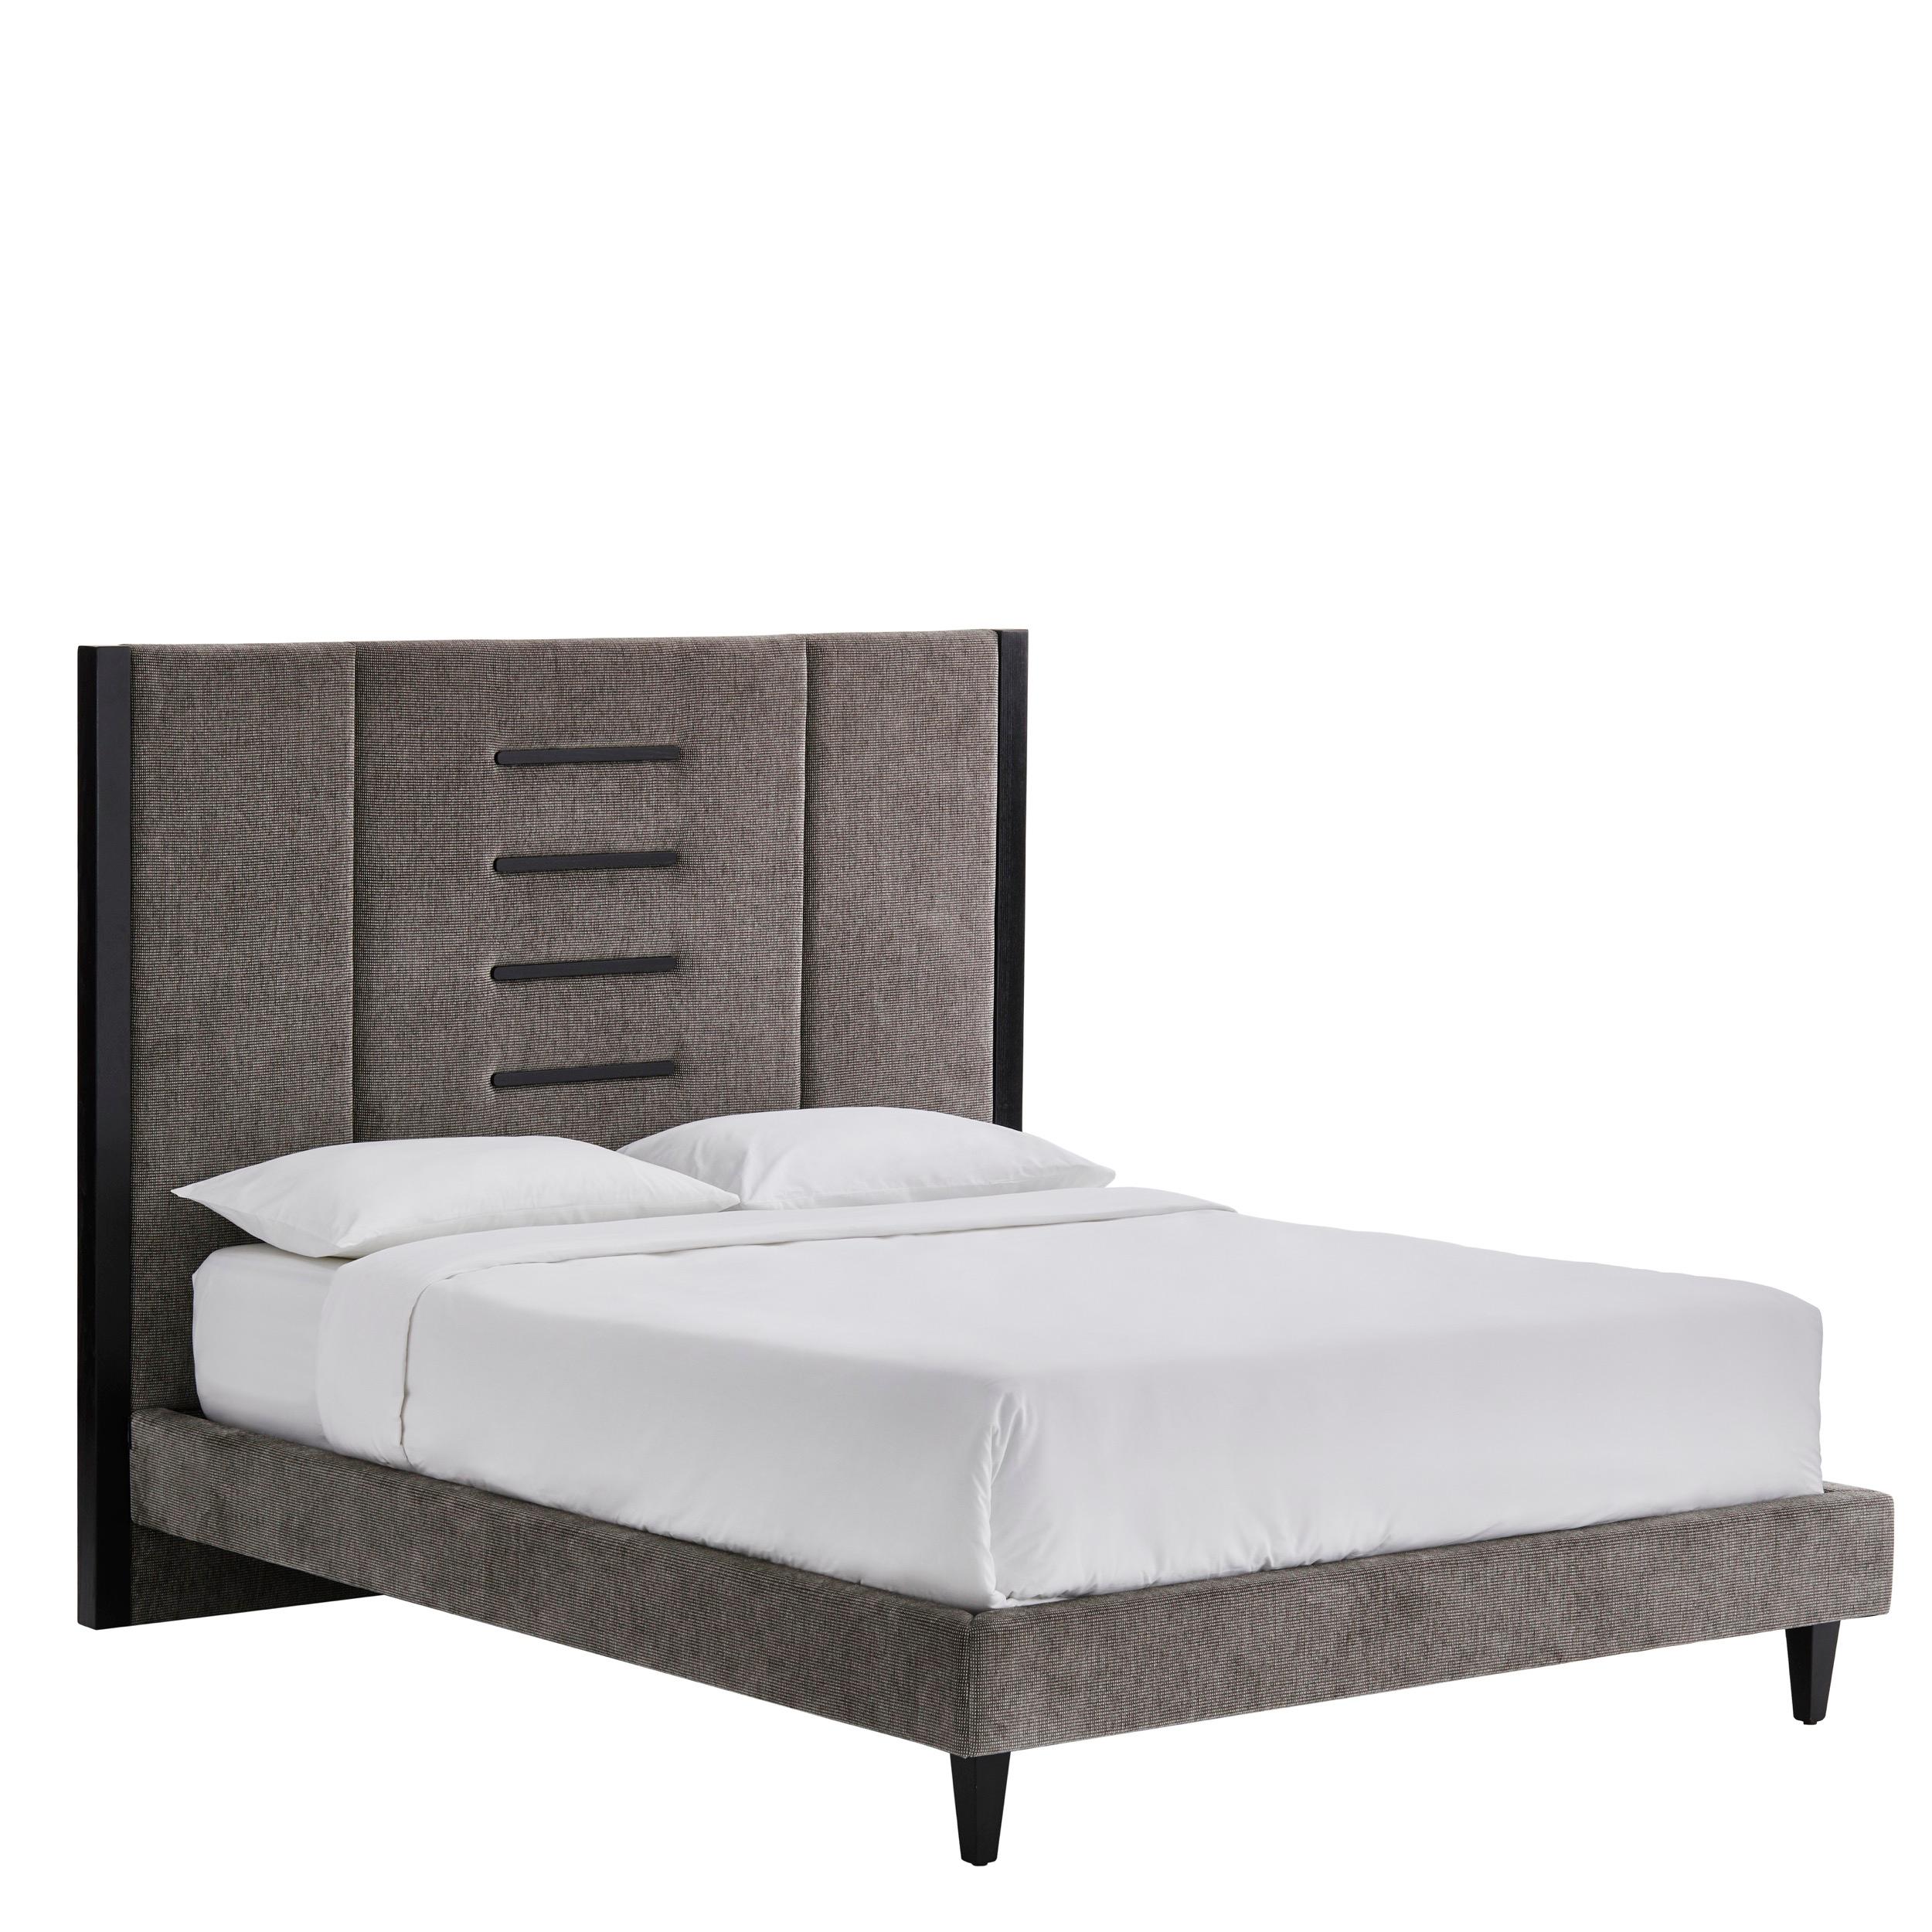 A timeless and Classic piece that will always look elegant in your bedroom.

Shown in matte black oak veneer structure and upholstered with FDG2899/19.
For a 180 x 200 mattress. Available in three different sizes upon request.
Mattress and box